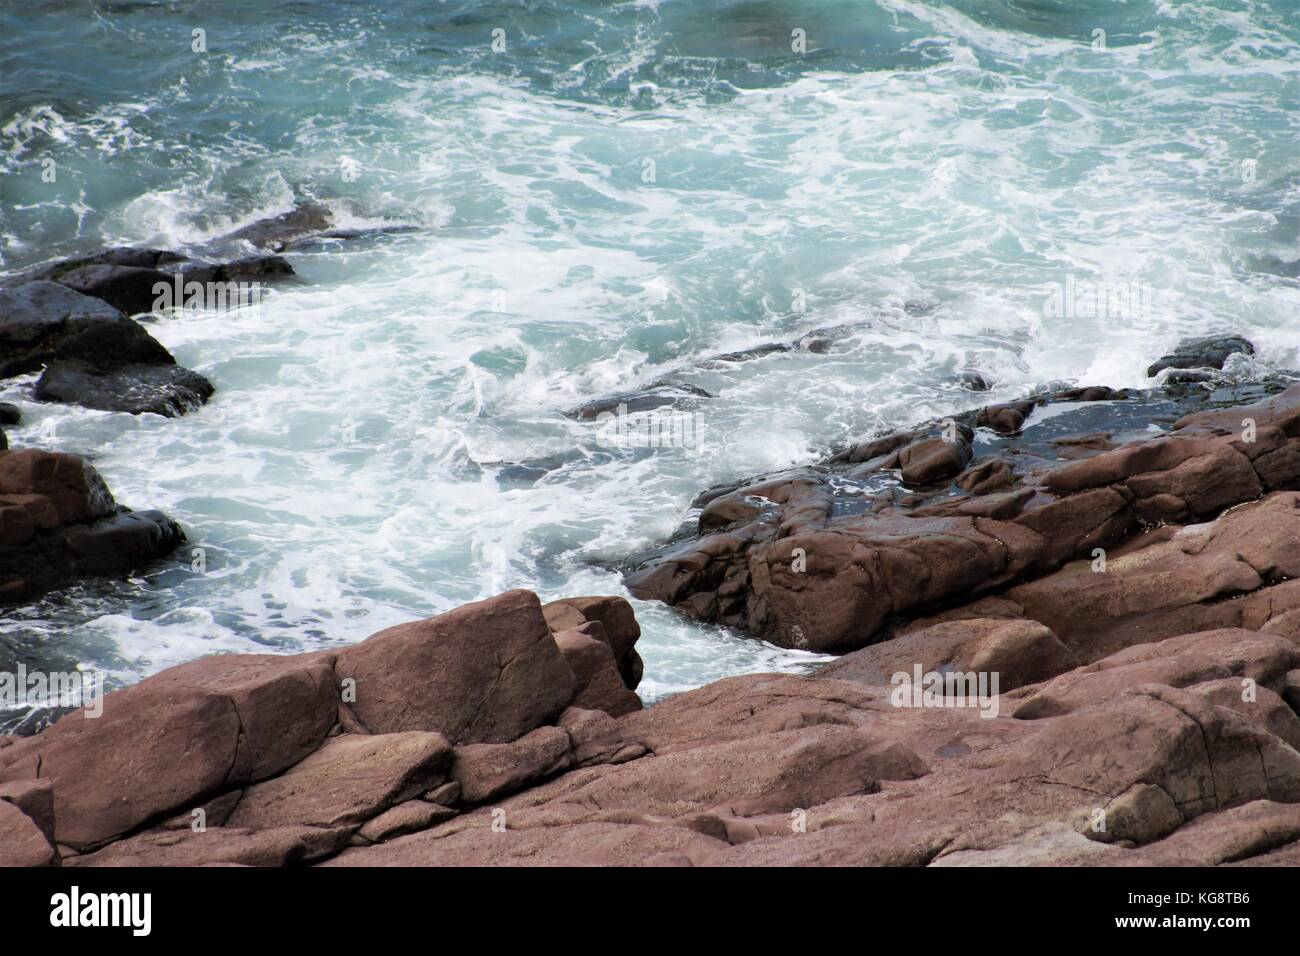 Waves breaking against the rocks, Cape Spear, Newfoundland. Rugged coastline, white water. Stock Photo